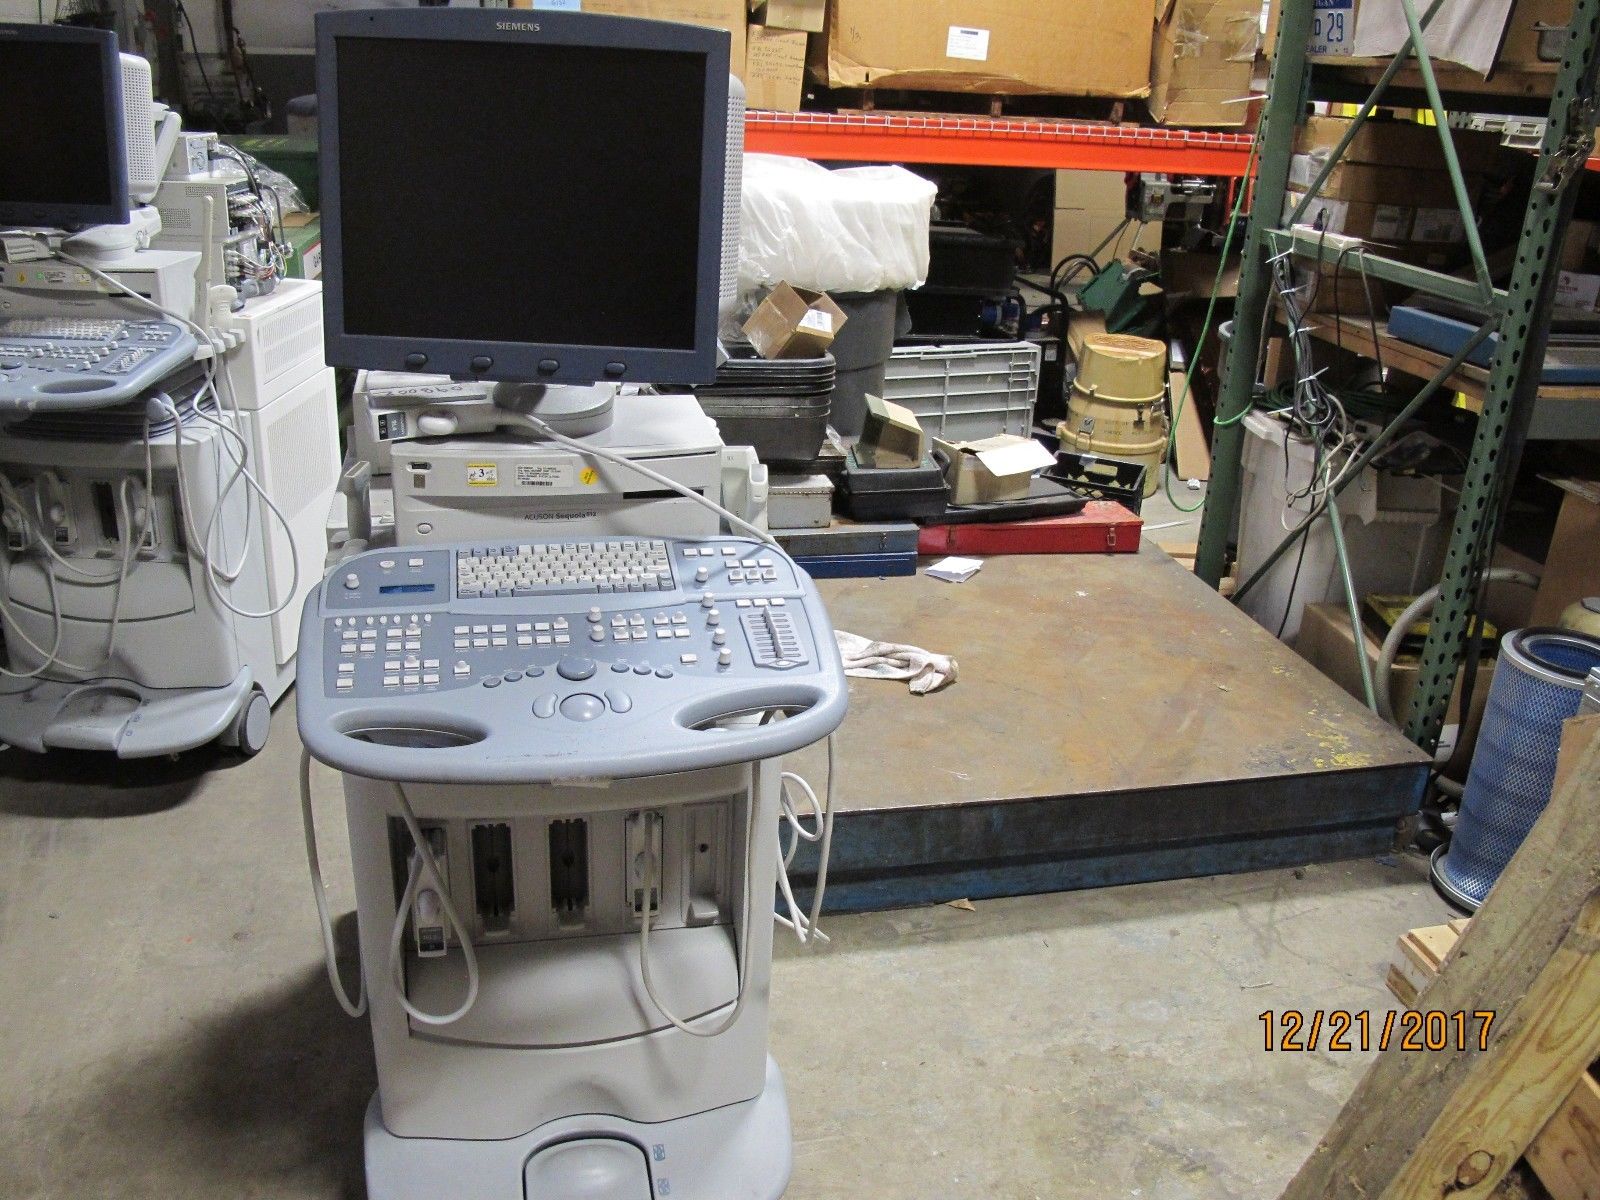 Siemens Acuson Sequoia 512 Portable Ultrasound LCD great shape 10038241 #1 DIAGNOSTIC ULTRASOUND MACHINES FOR SALE